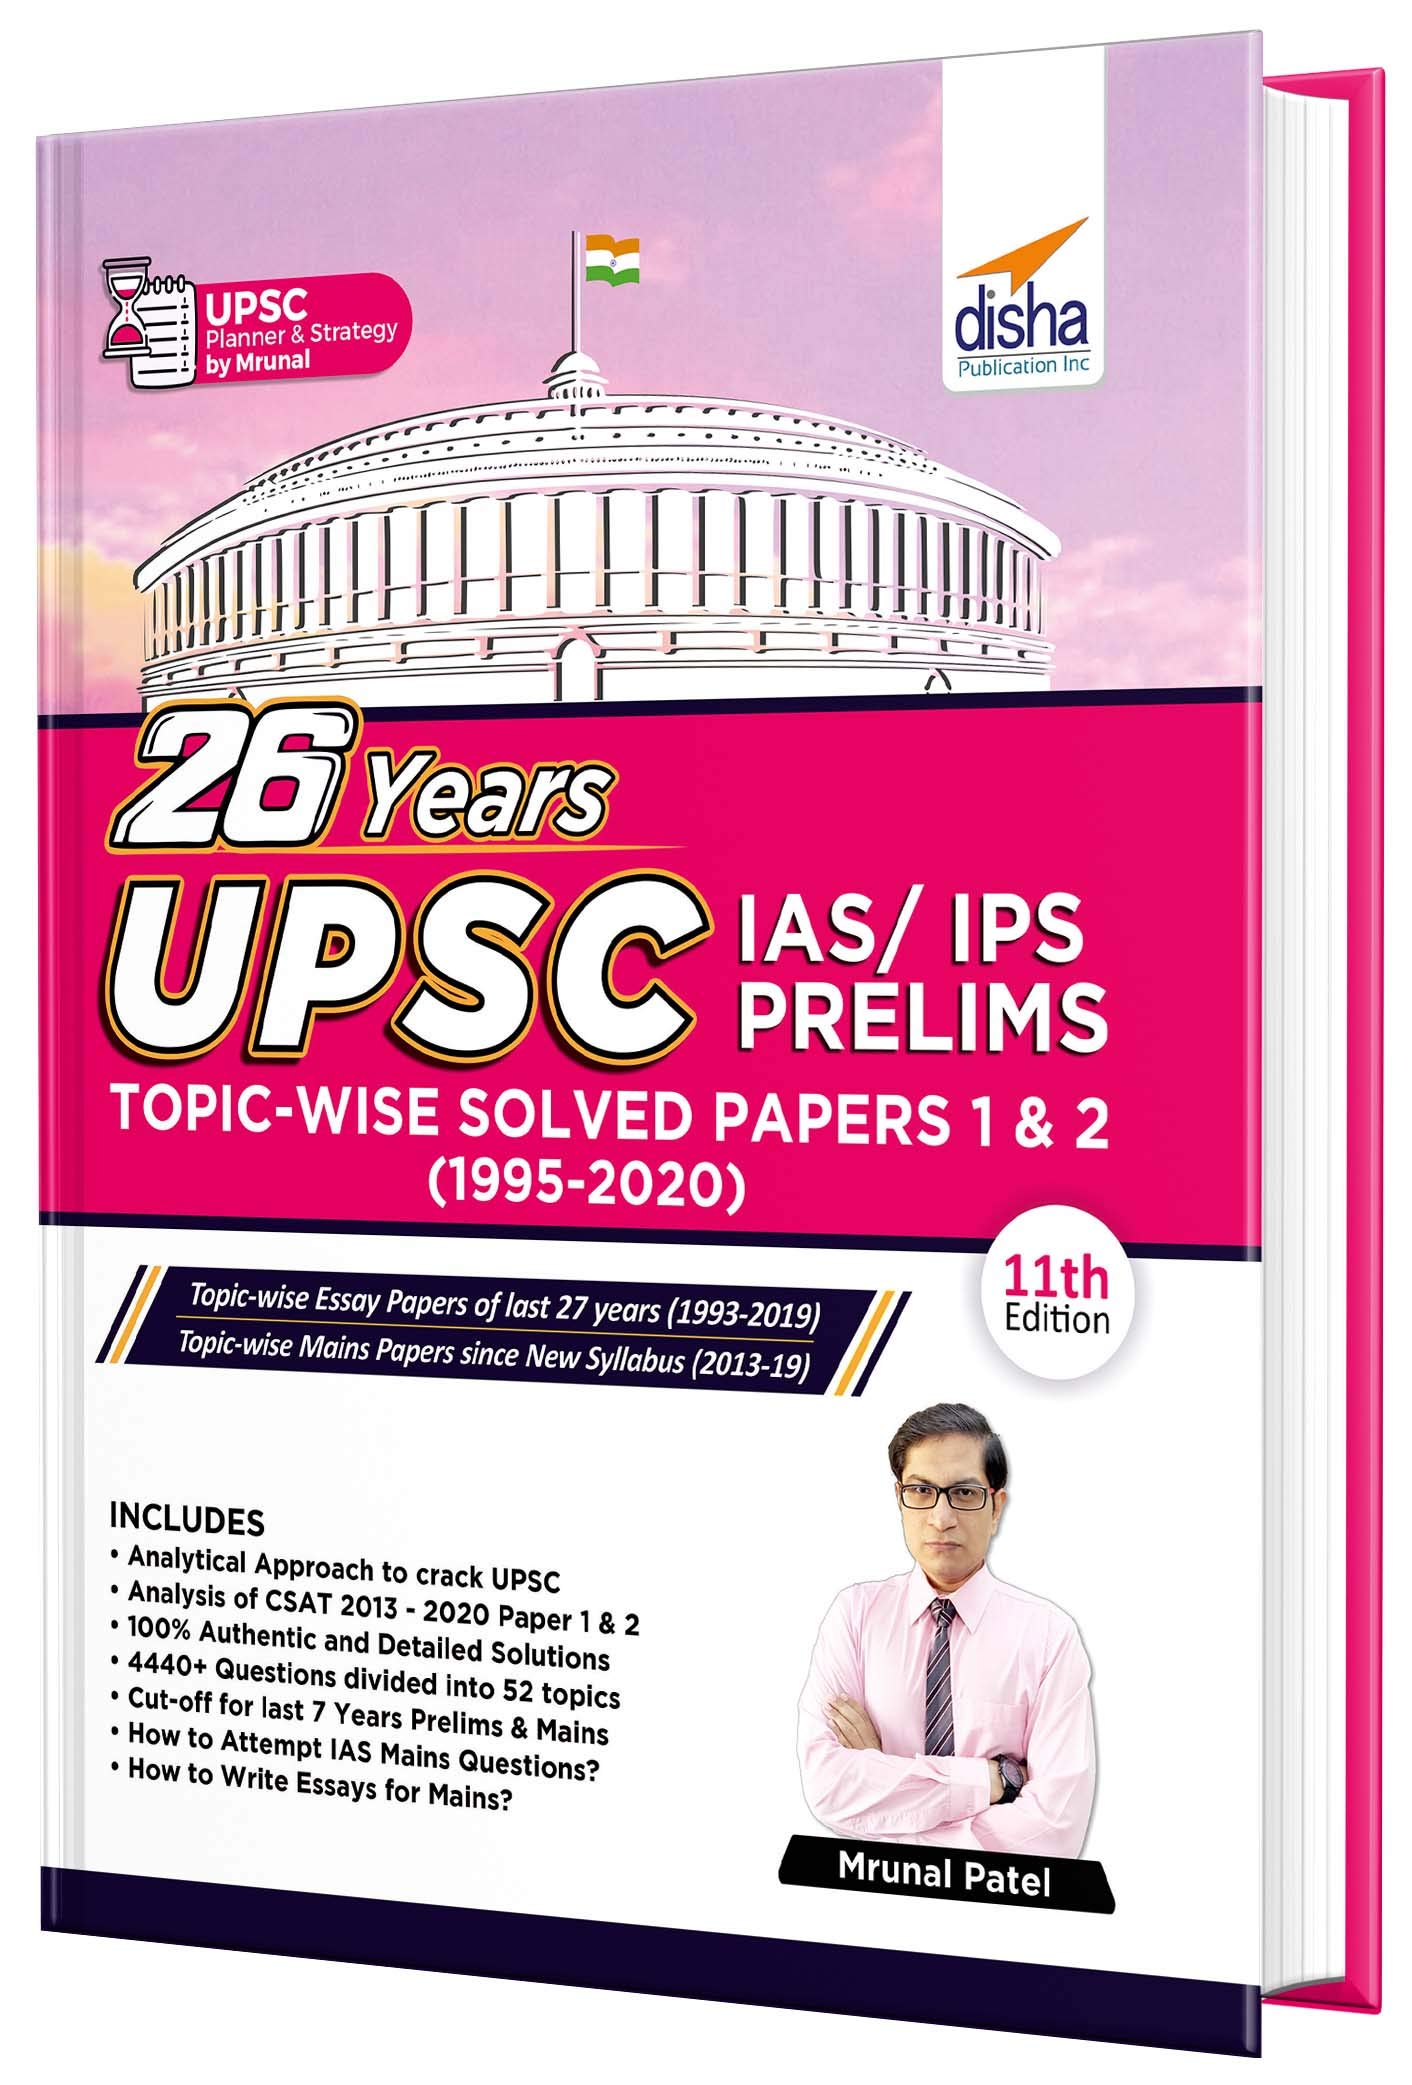 26 Years UPSC IAS/ IPS Prelims Topic-wise Solved Papers 1 & 2 (1995 - 2020) - Exam Preparation Book